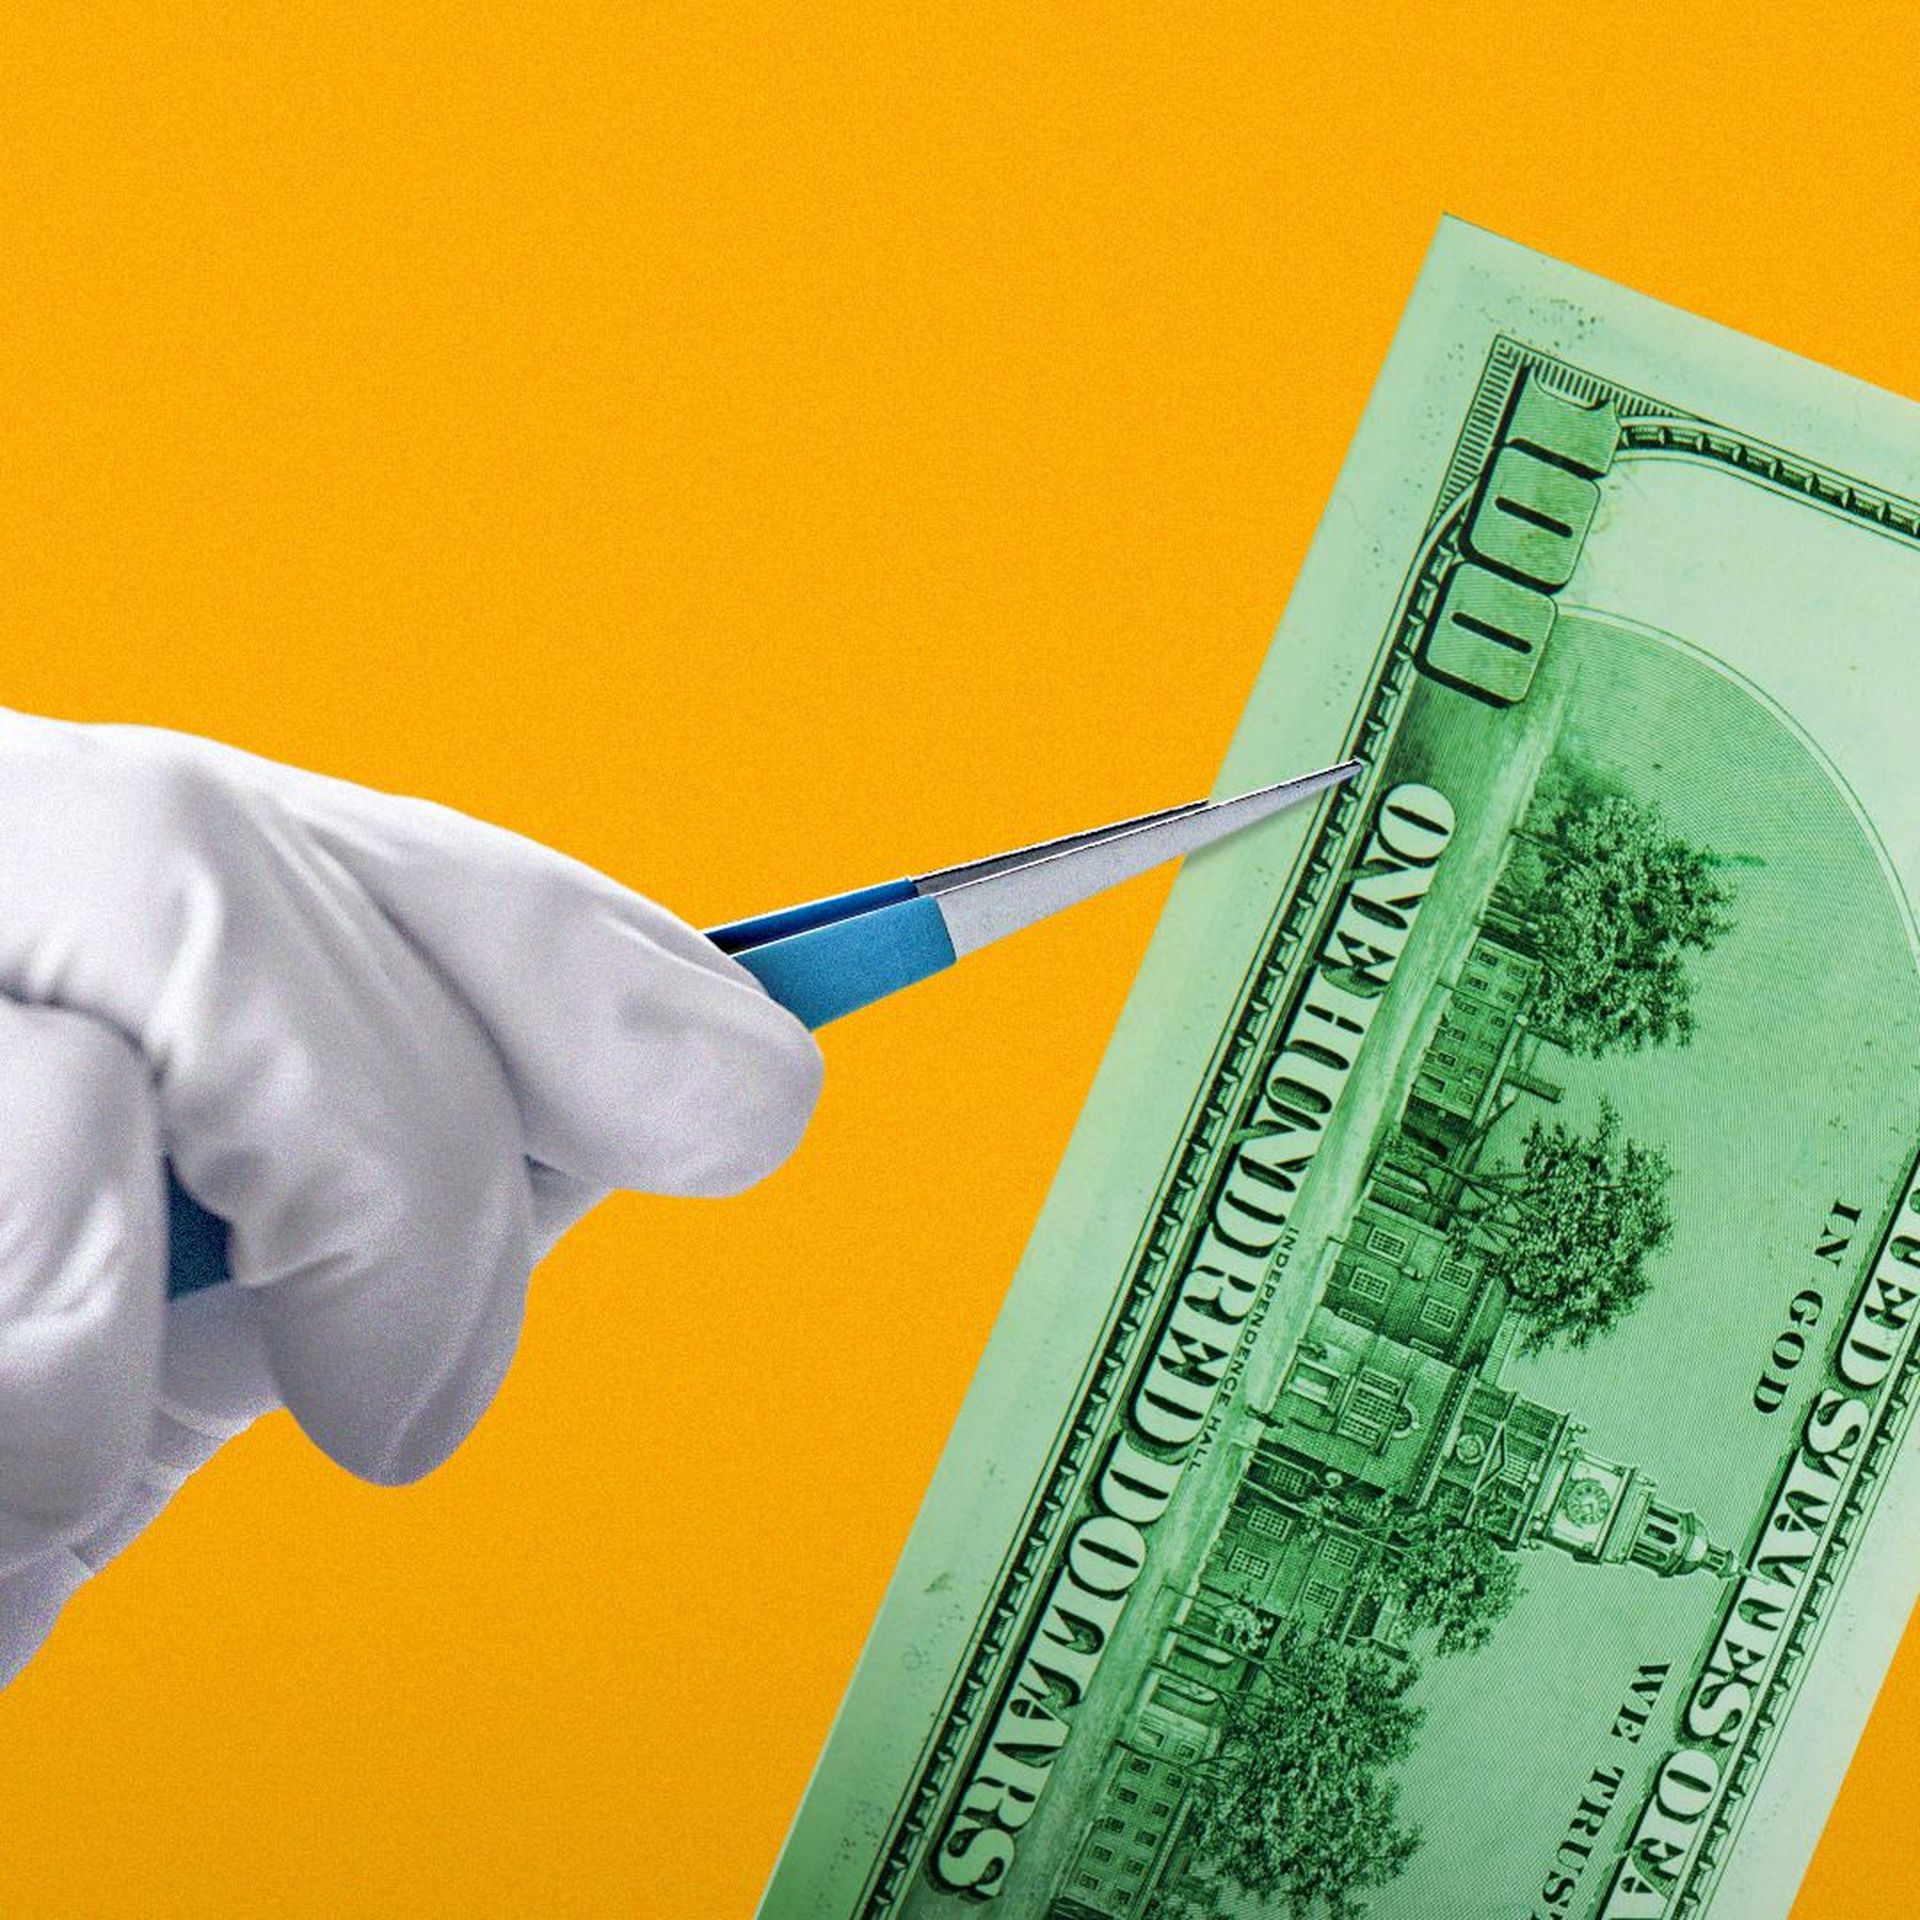 Illustration of a gloved hand with tweezers holding a $100 bill.